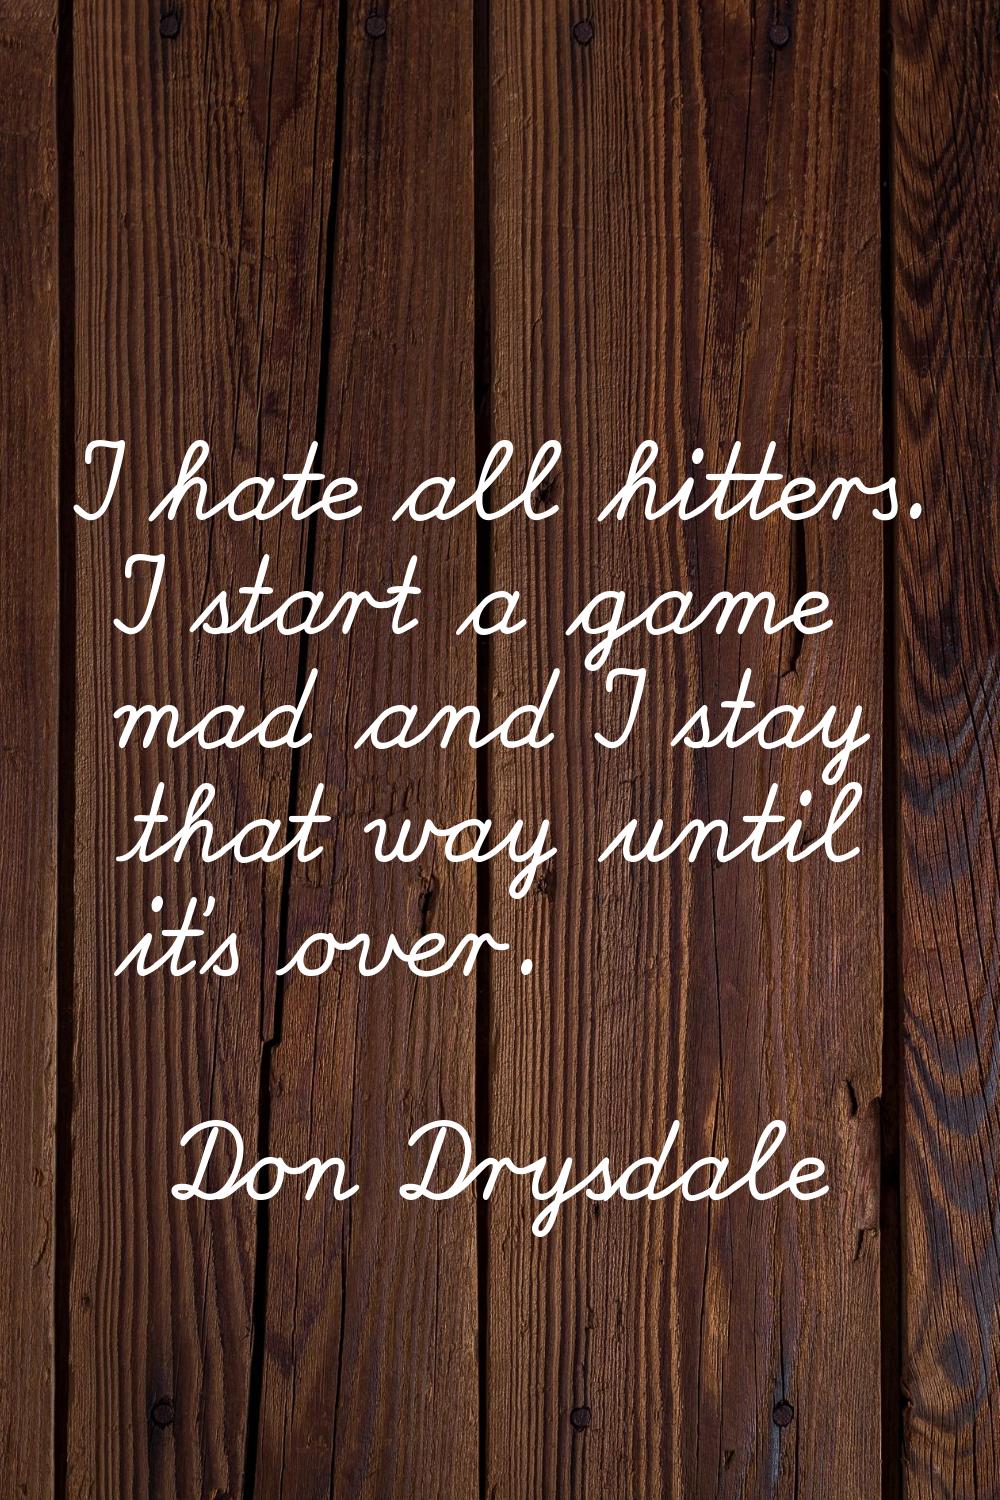 I hate all hitters. I start a game mad and I stay that way until it's over.